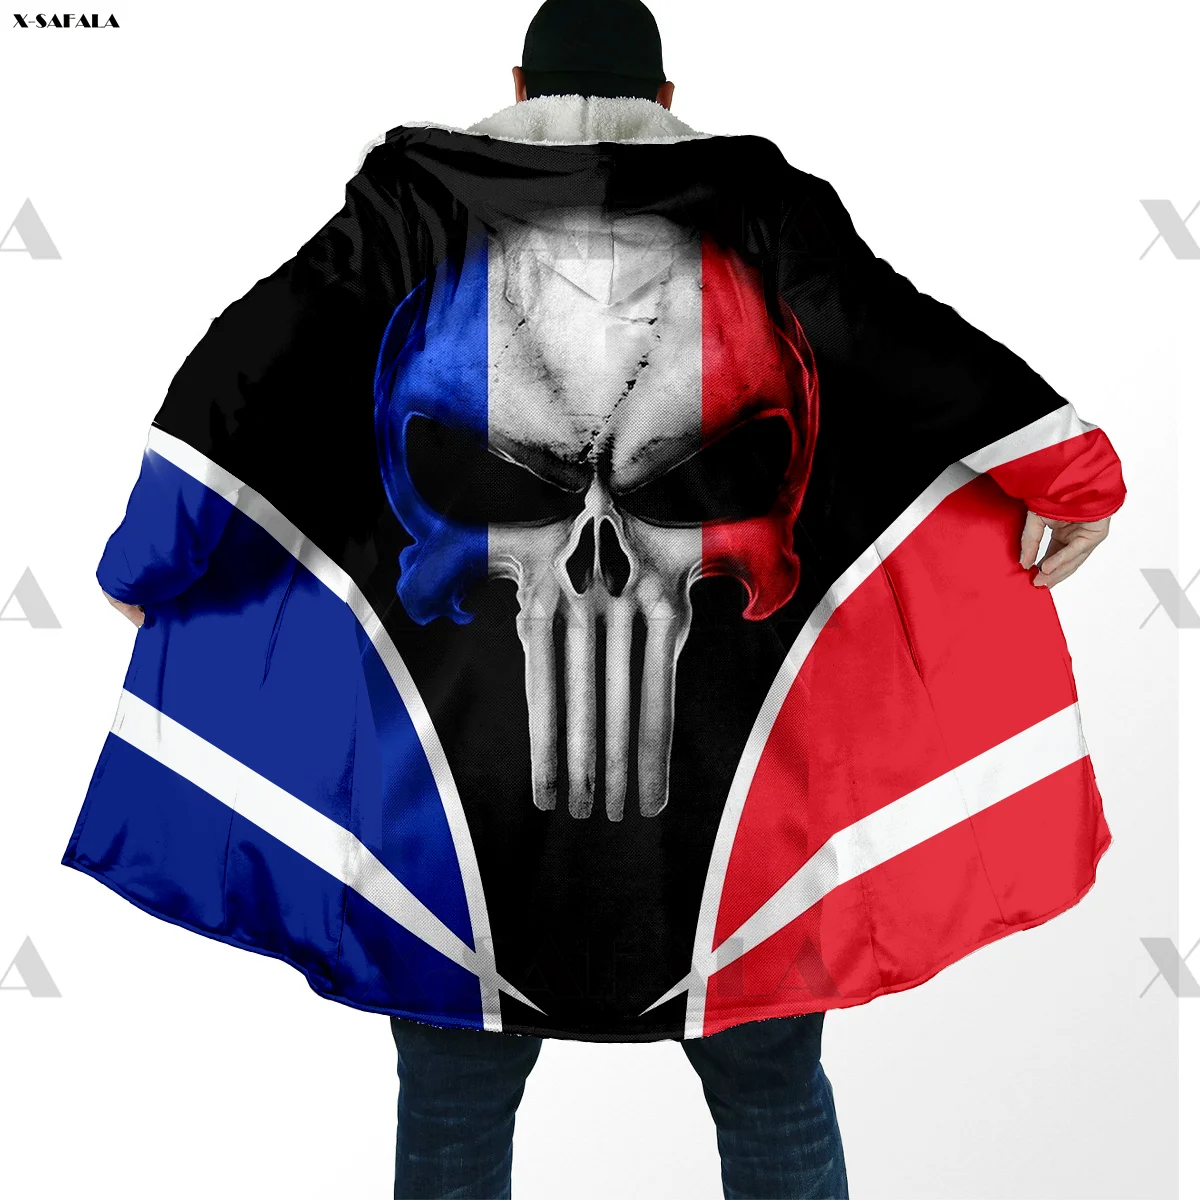 

France Country Flag Skull Eagle Printed Hoodie Long Duffle Topcoat Hooded Blanket Cloak Thick Jacket Cotton Pullovers Overcoat